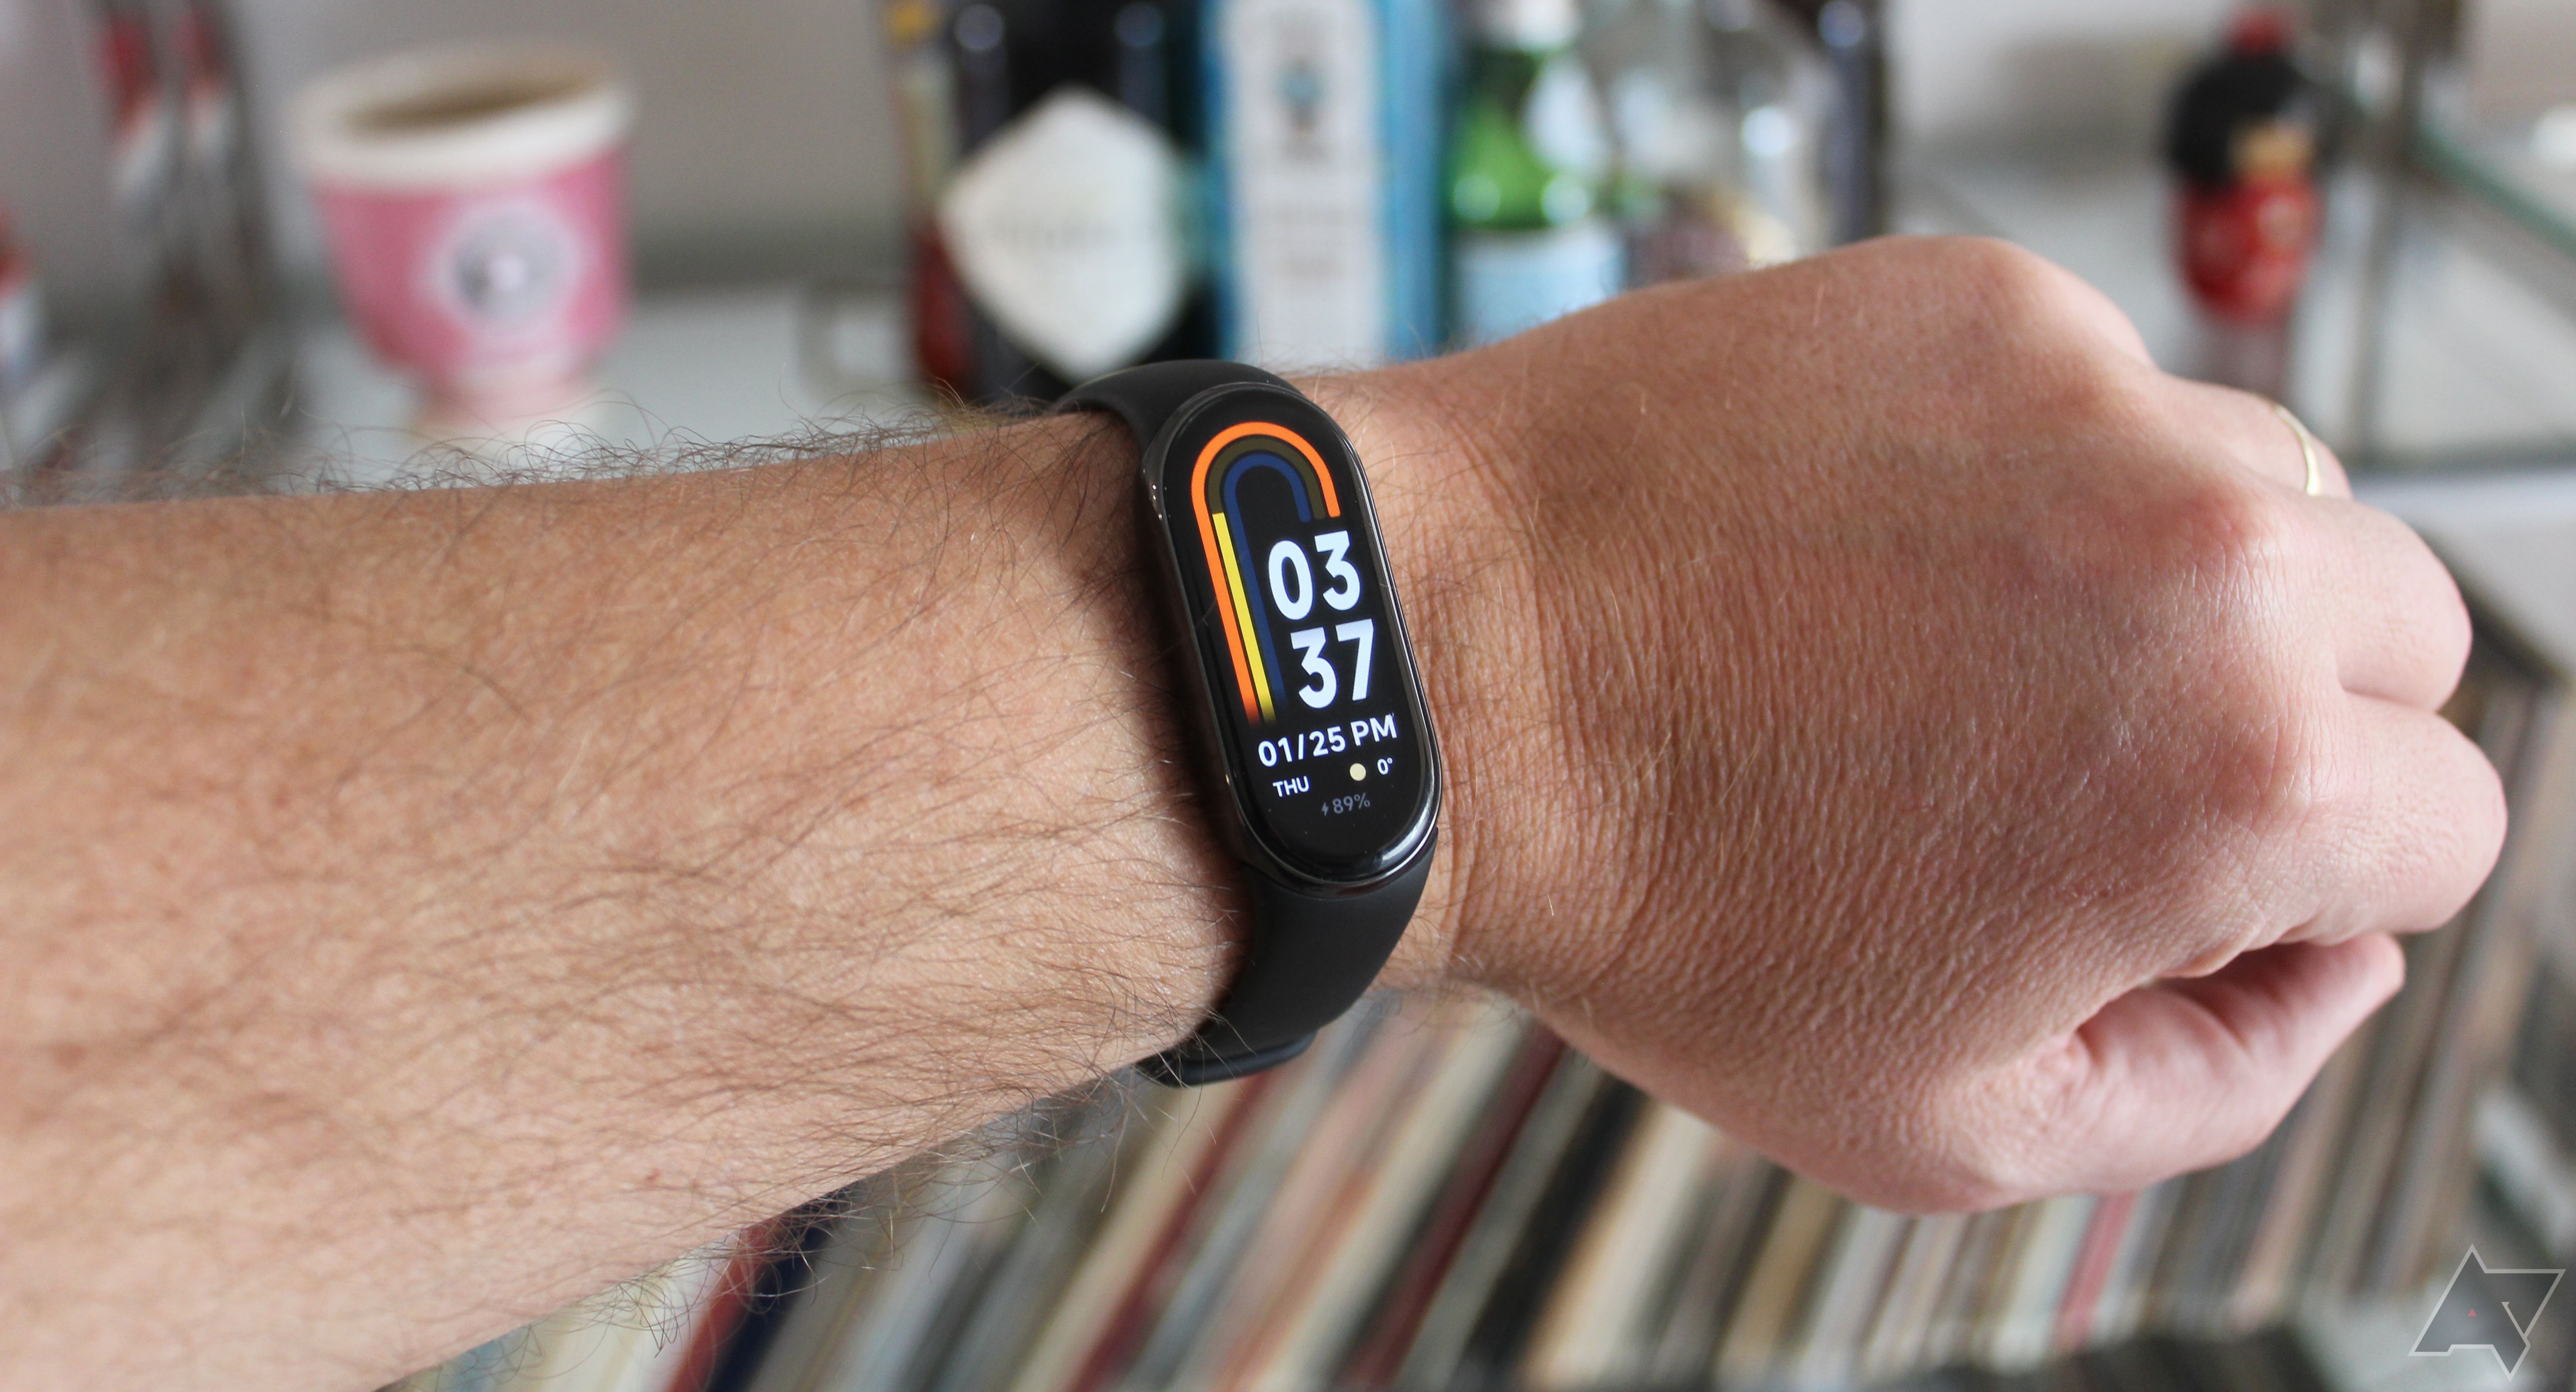 Fitness tracking on a budget